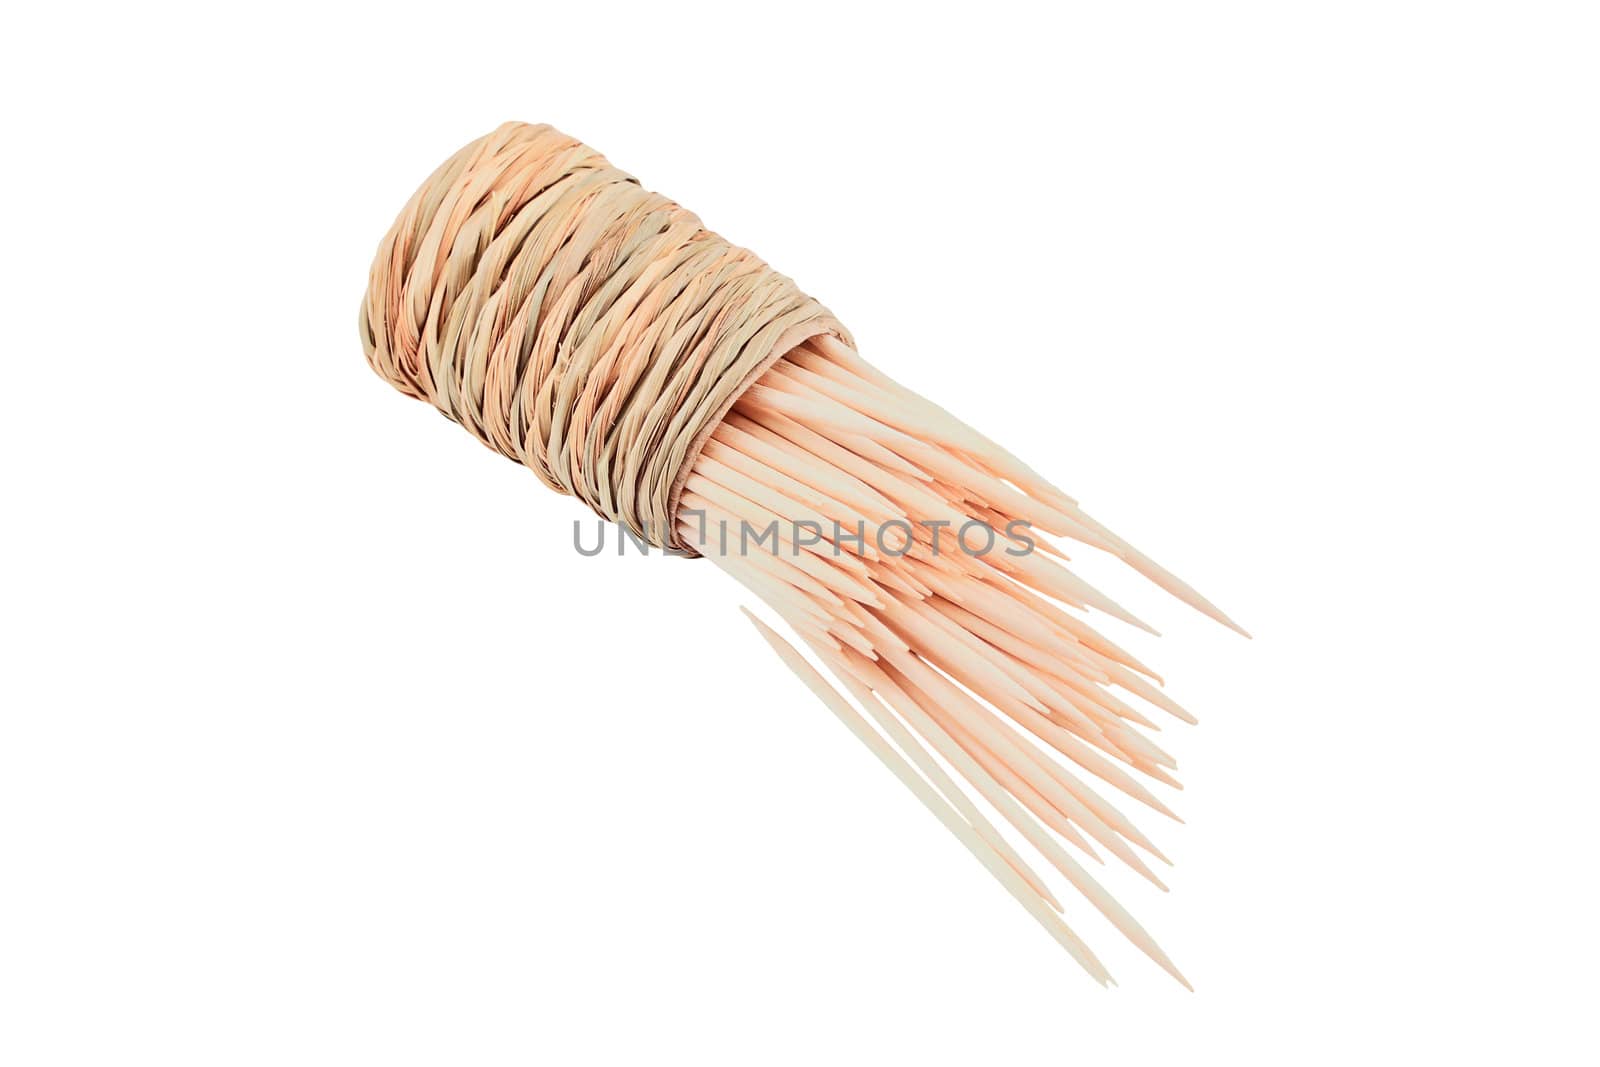 Spilled toothpicks with the holder isolated on white background